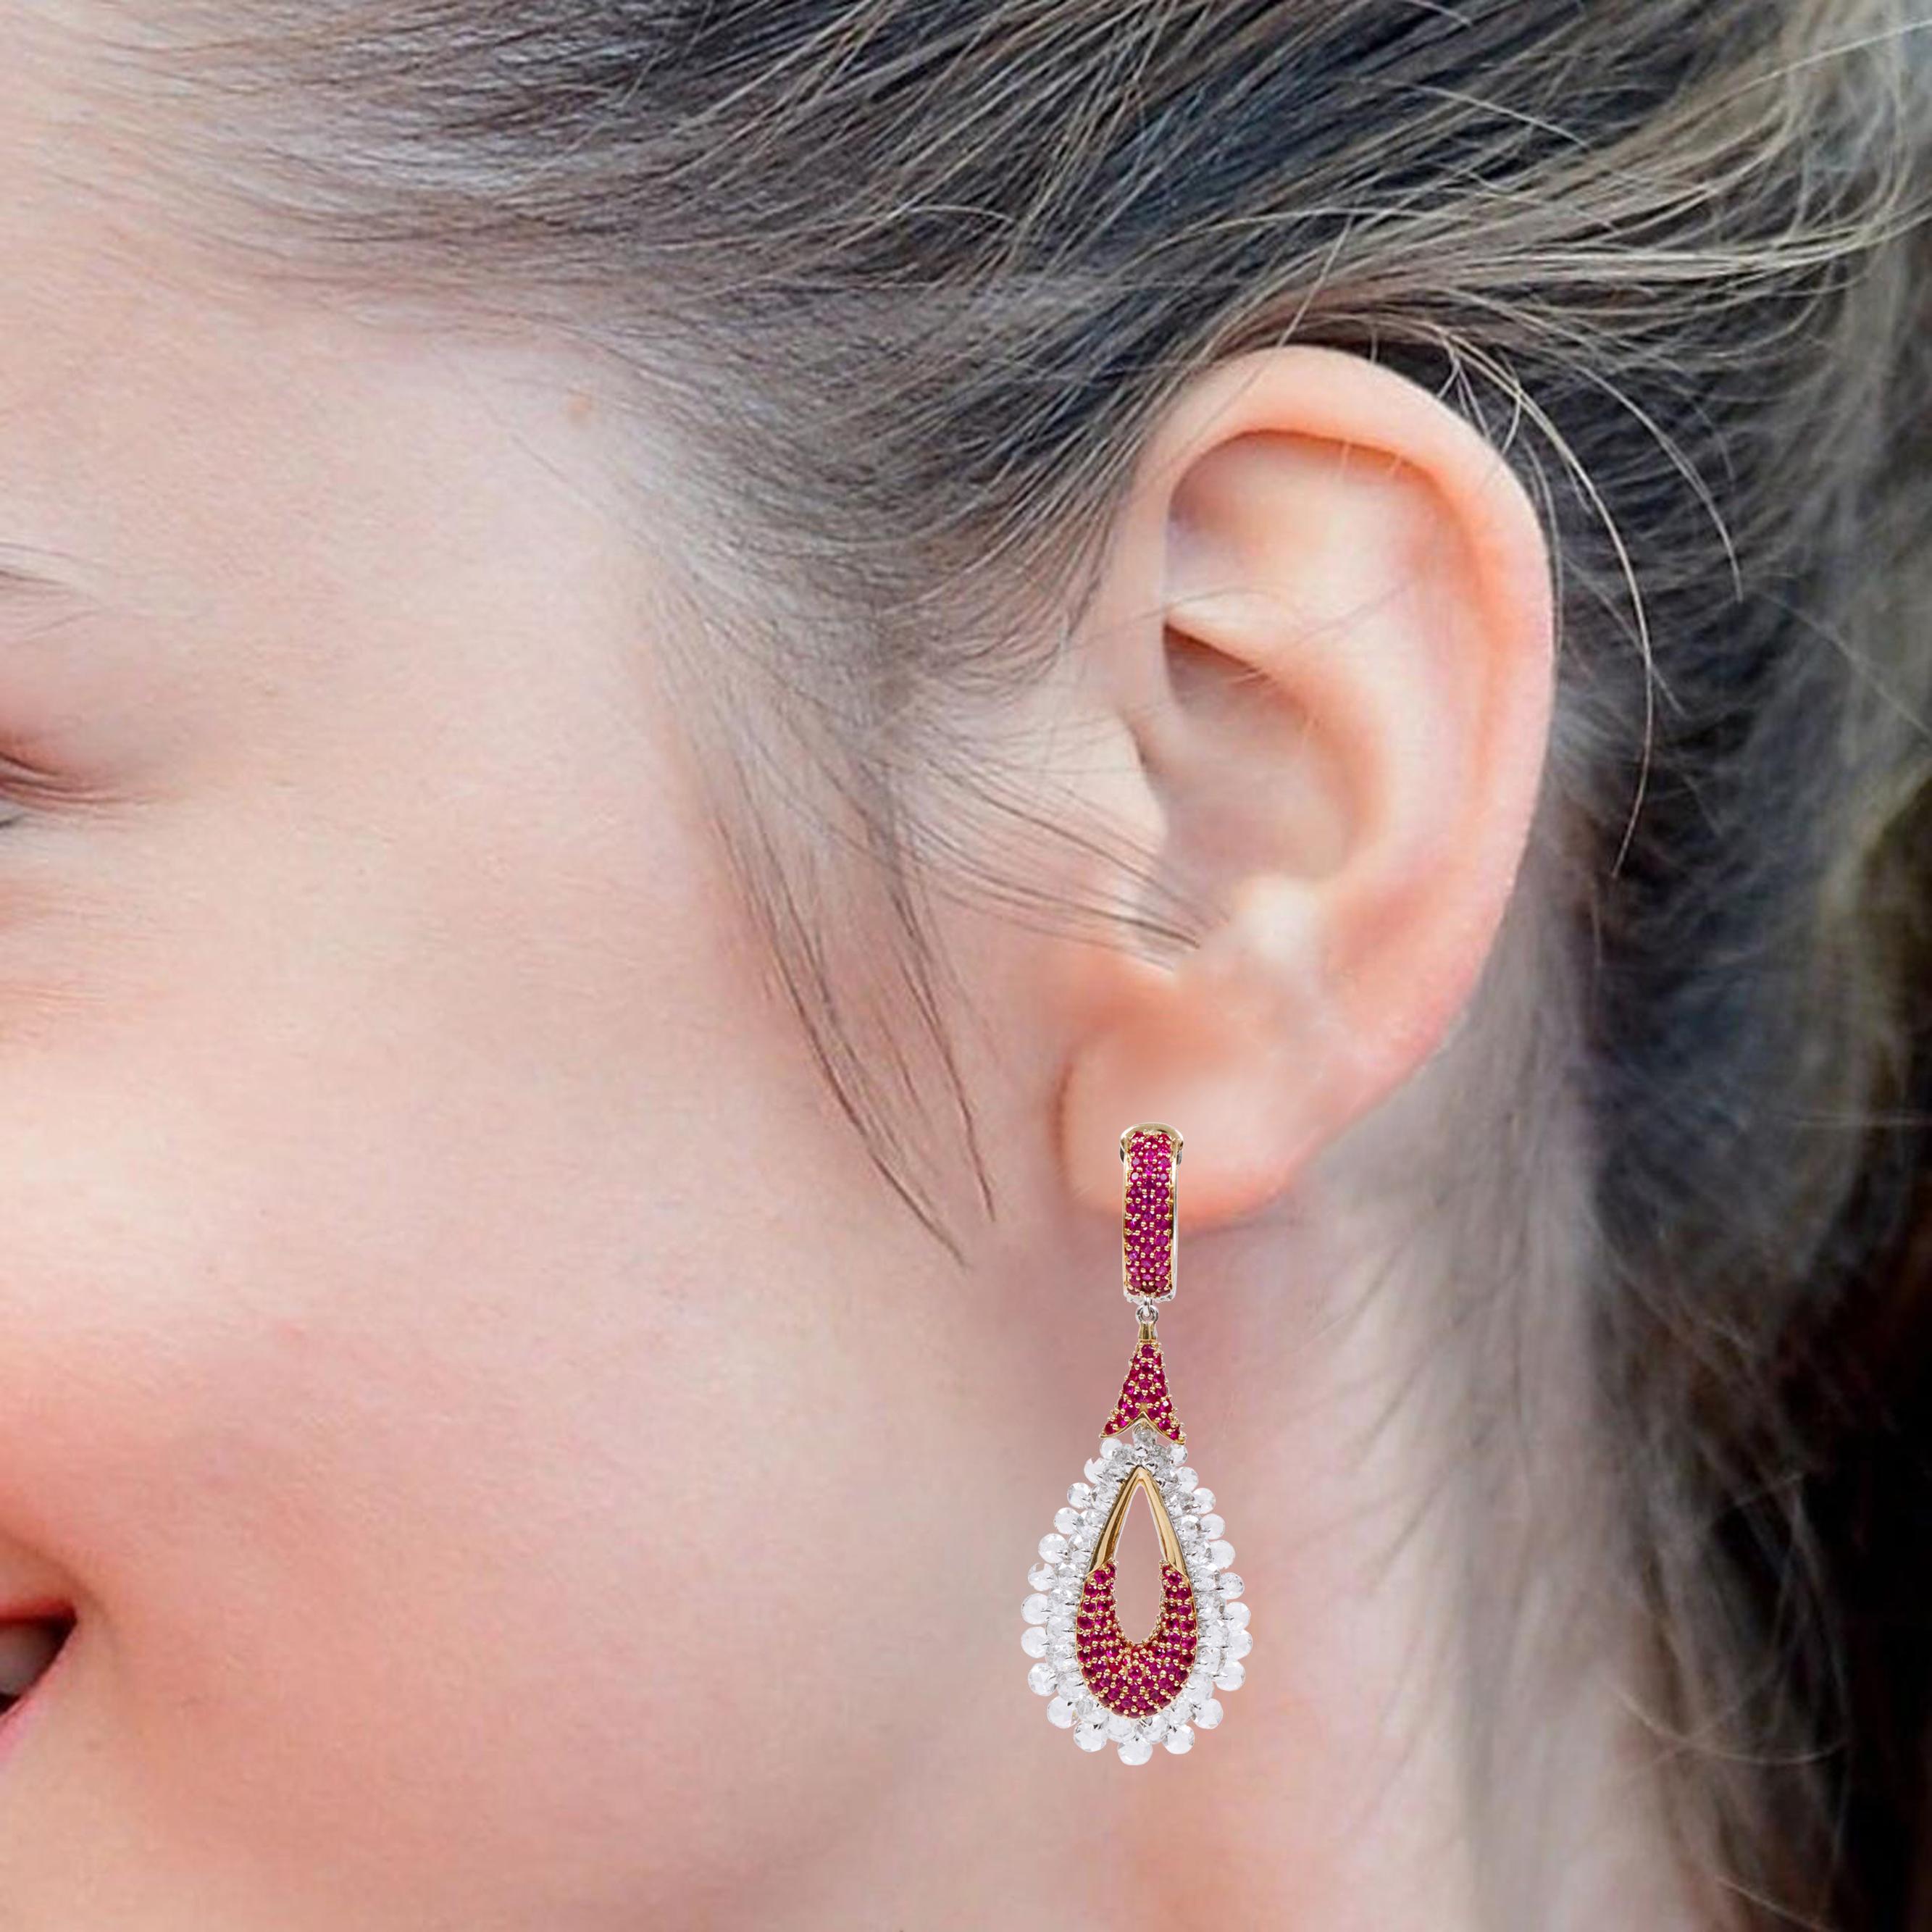 18 Karat Gold 8.51 Carats Diamond and Ruby Reversible Cocktail Earrings

Discover the epitome of sophistication and adaptability with our Diamond and Ruby Reversible Cocktail Earrings. One side of these exquisite earrings features a meticulous